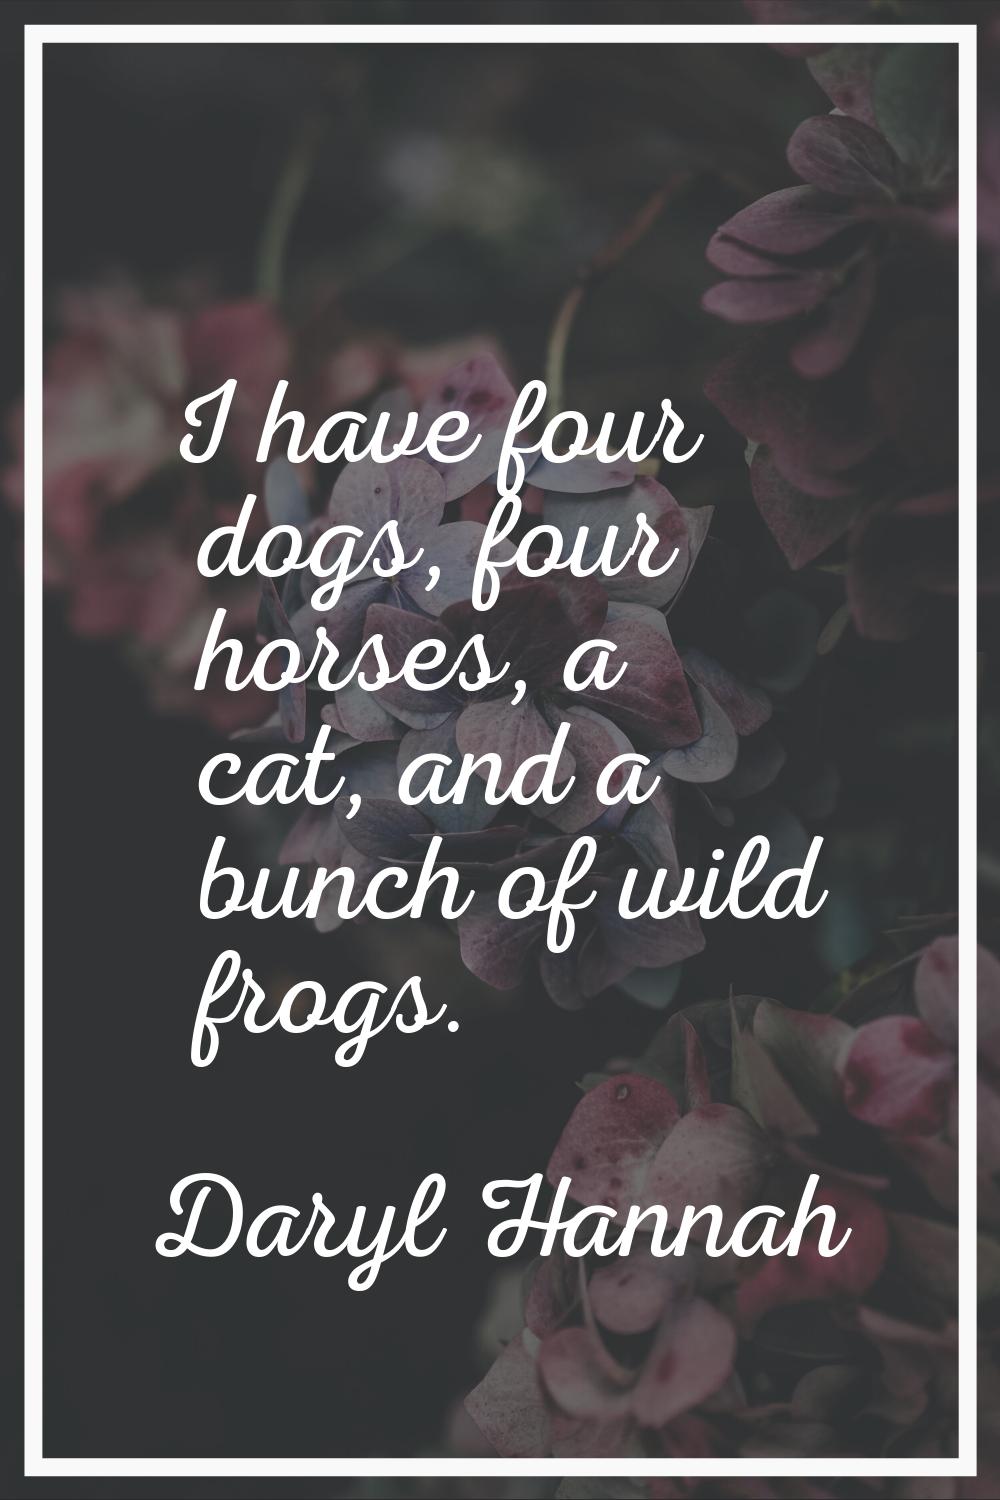 I have four dogs, four horses, a cat, and a bunch of wild frogs.